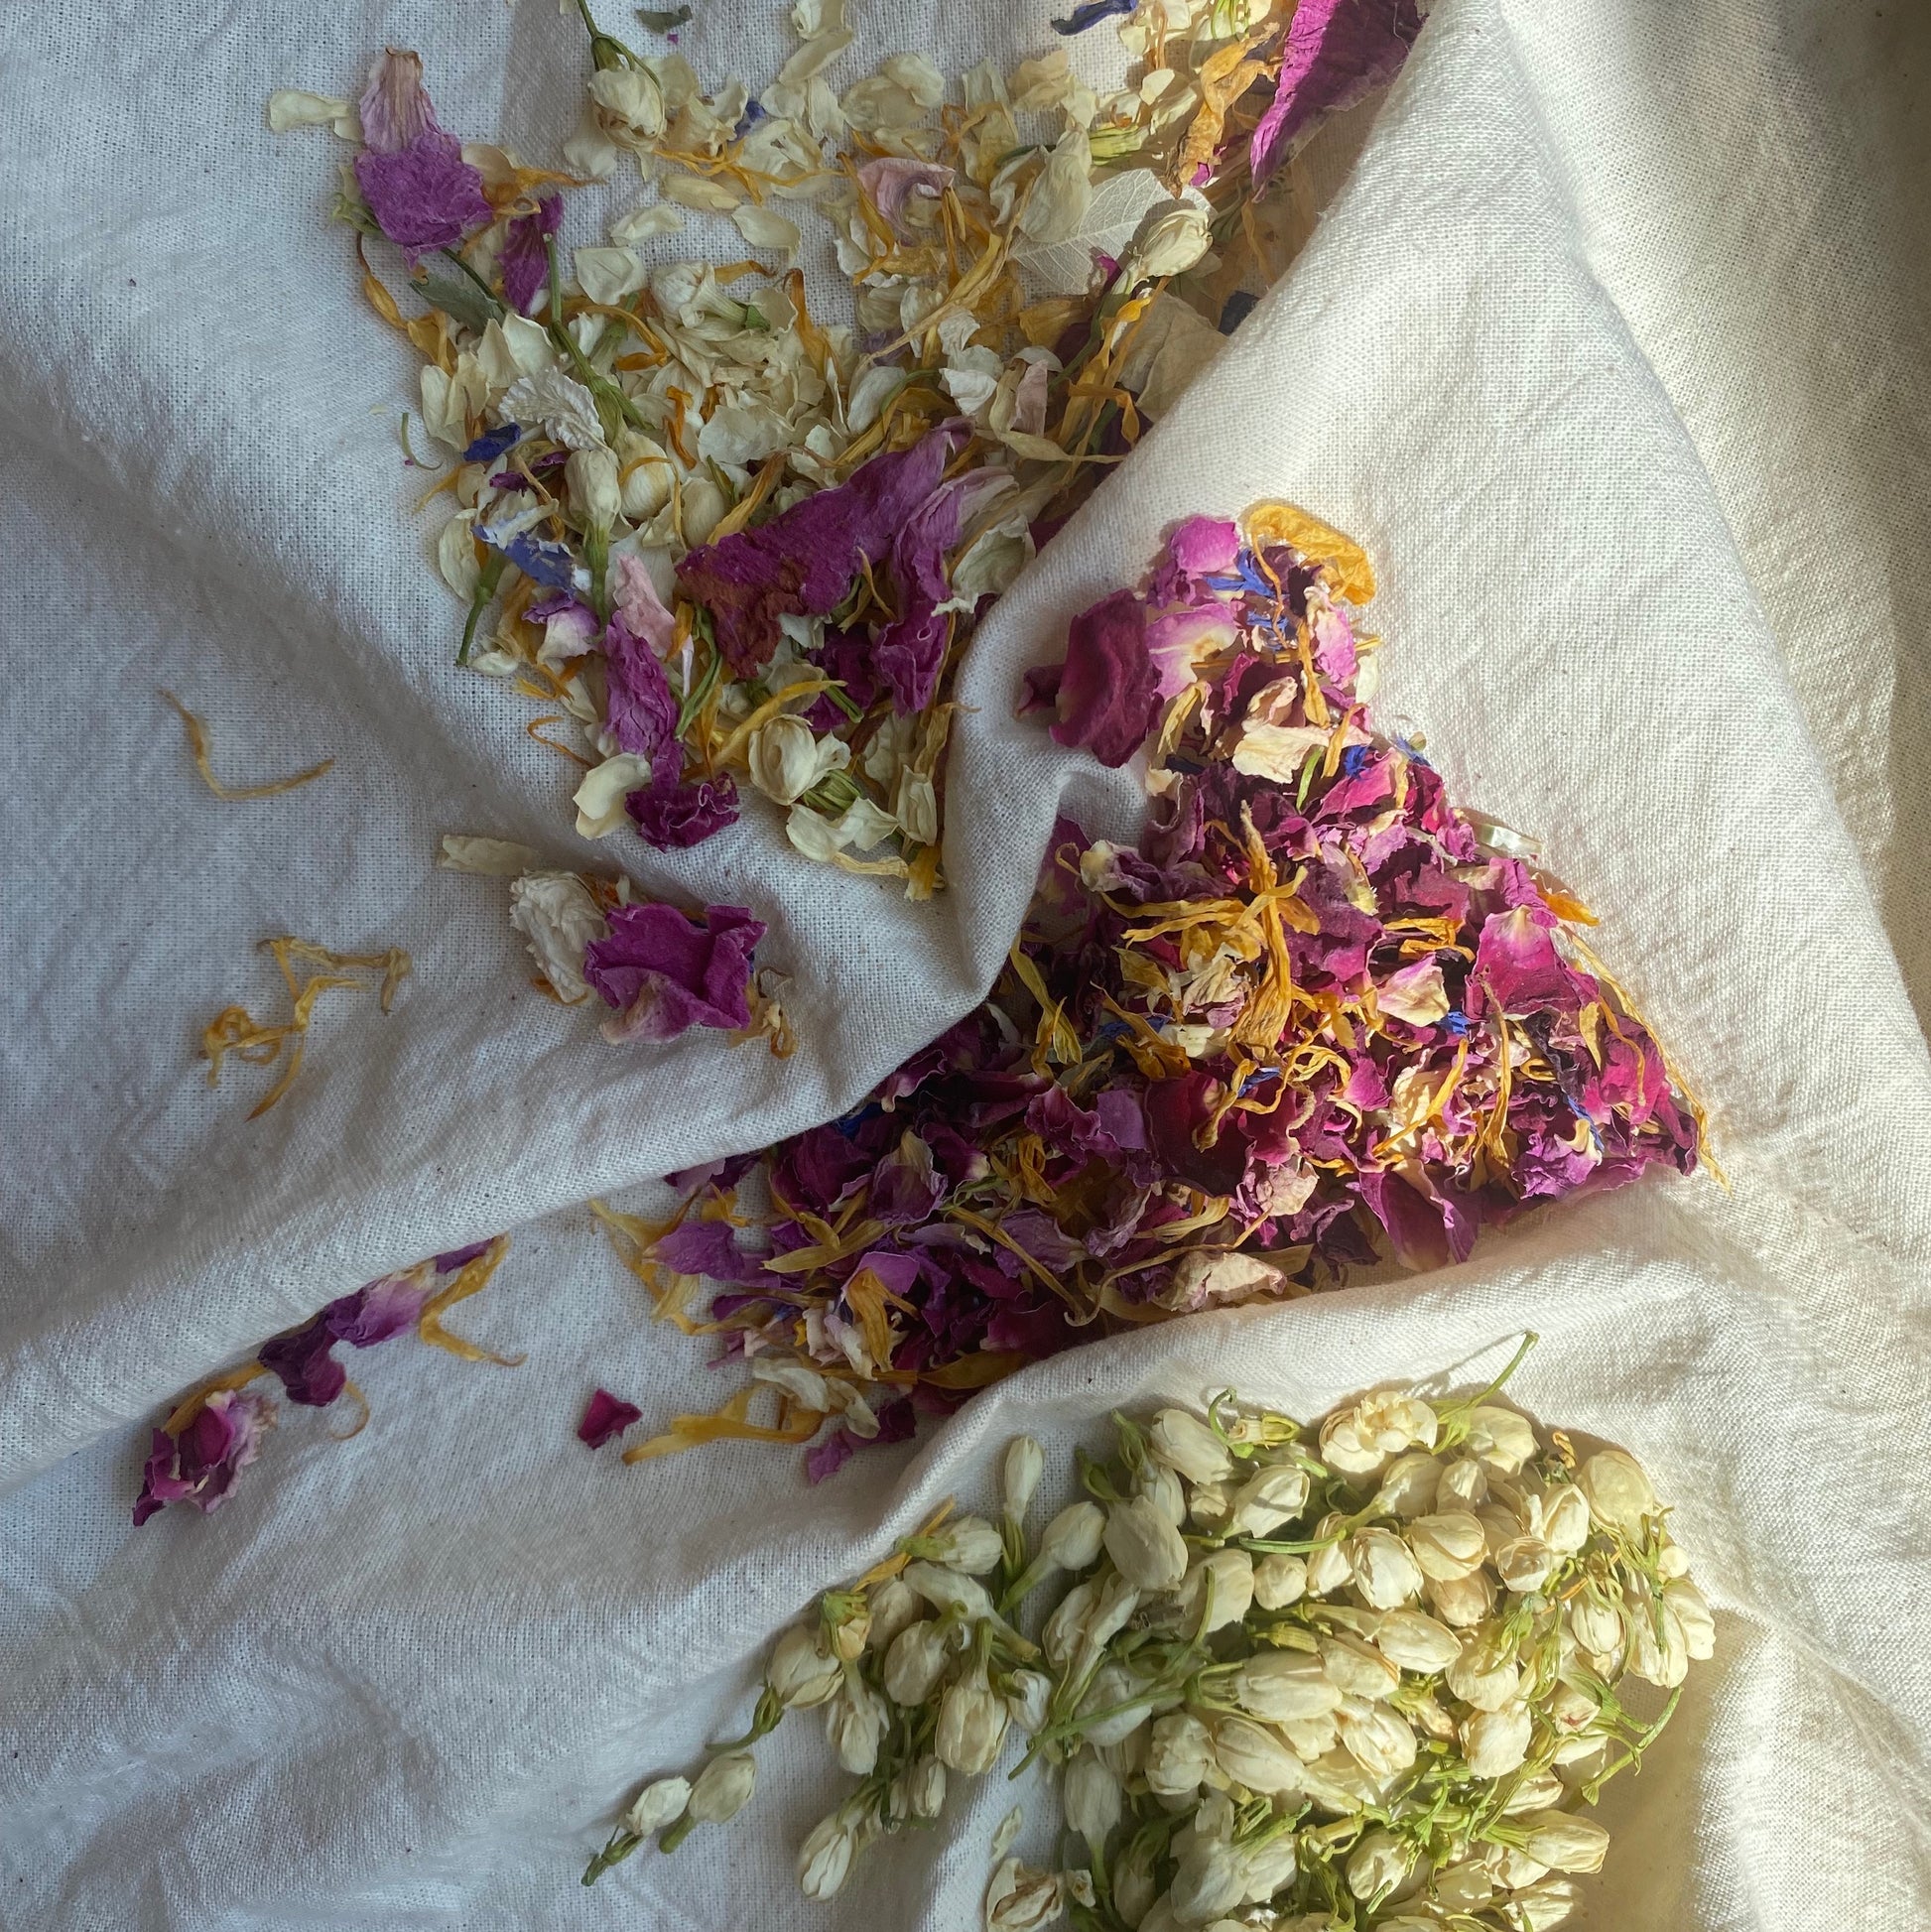 Three exclusive Bouclé London wedding confetti blends made from dried flowers.